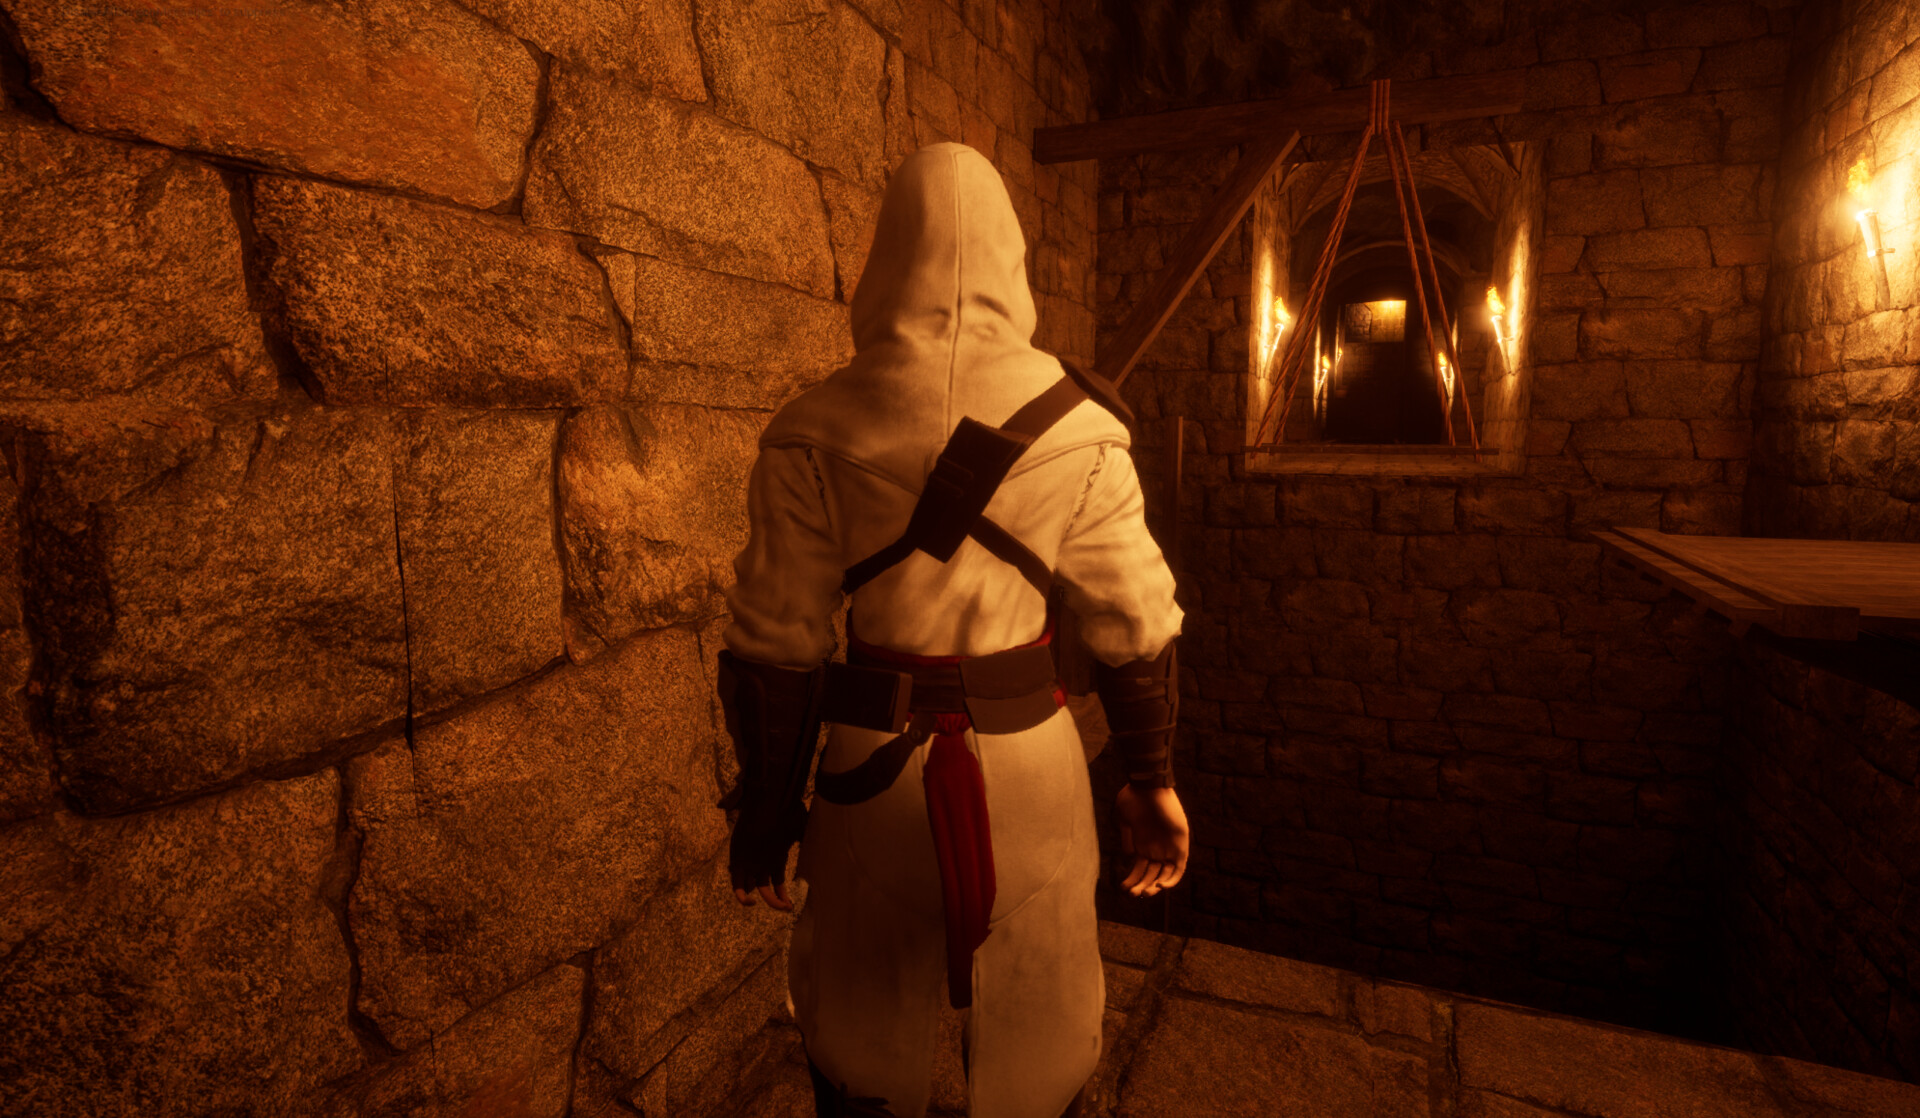 Assassin's Creed: Bloodlines Recreated 